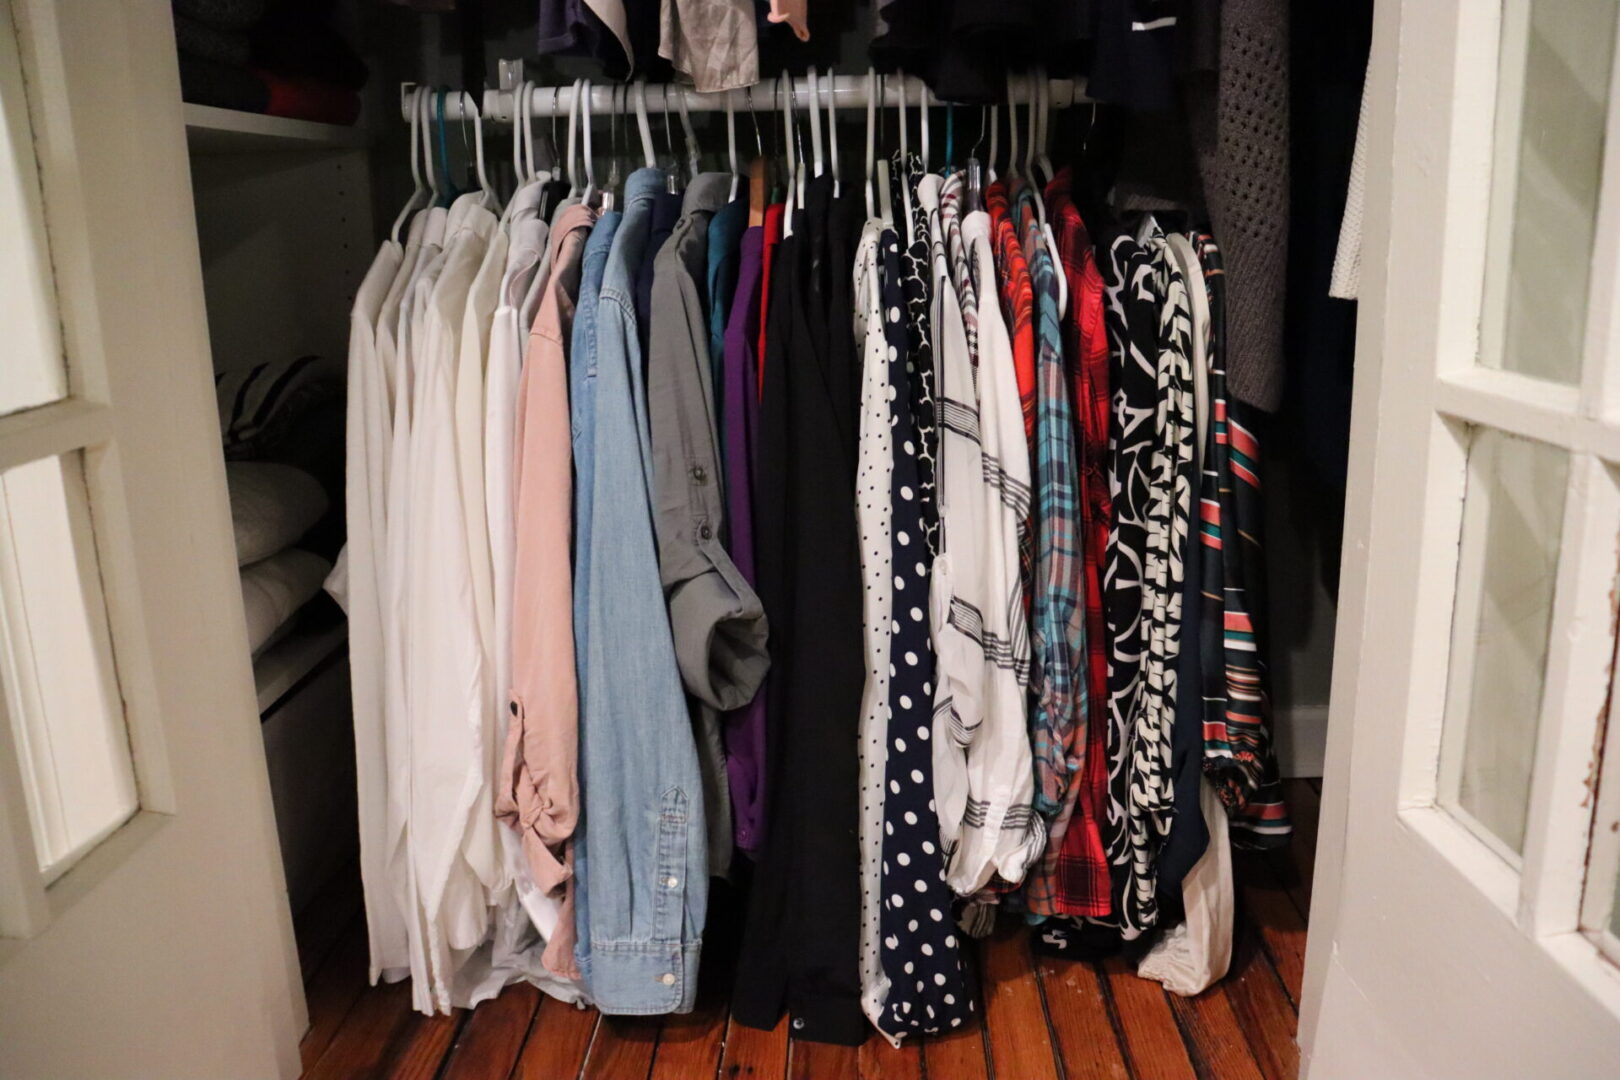 One level of hanged clothes in a closet